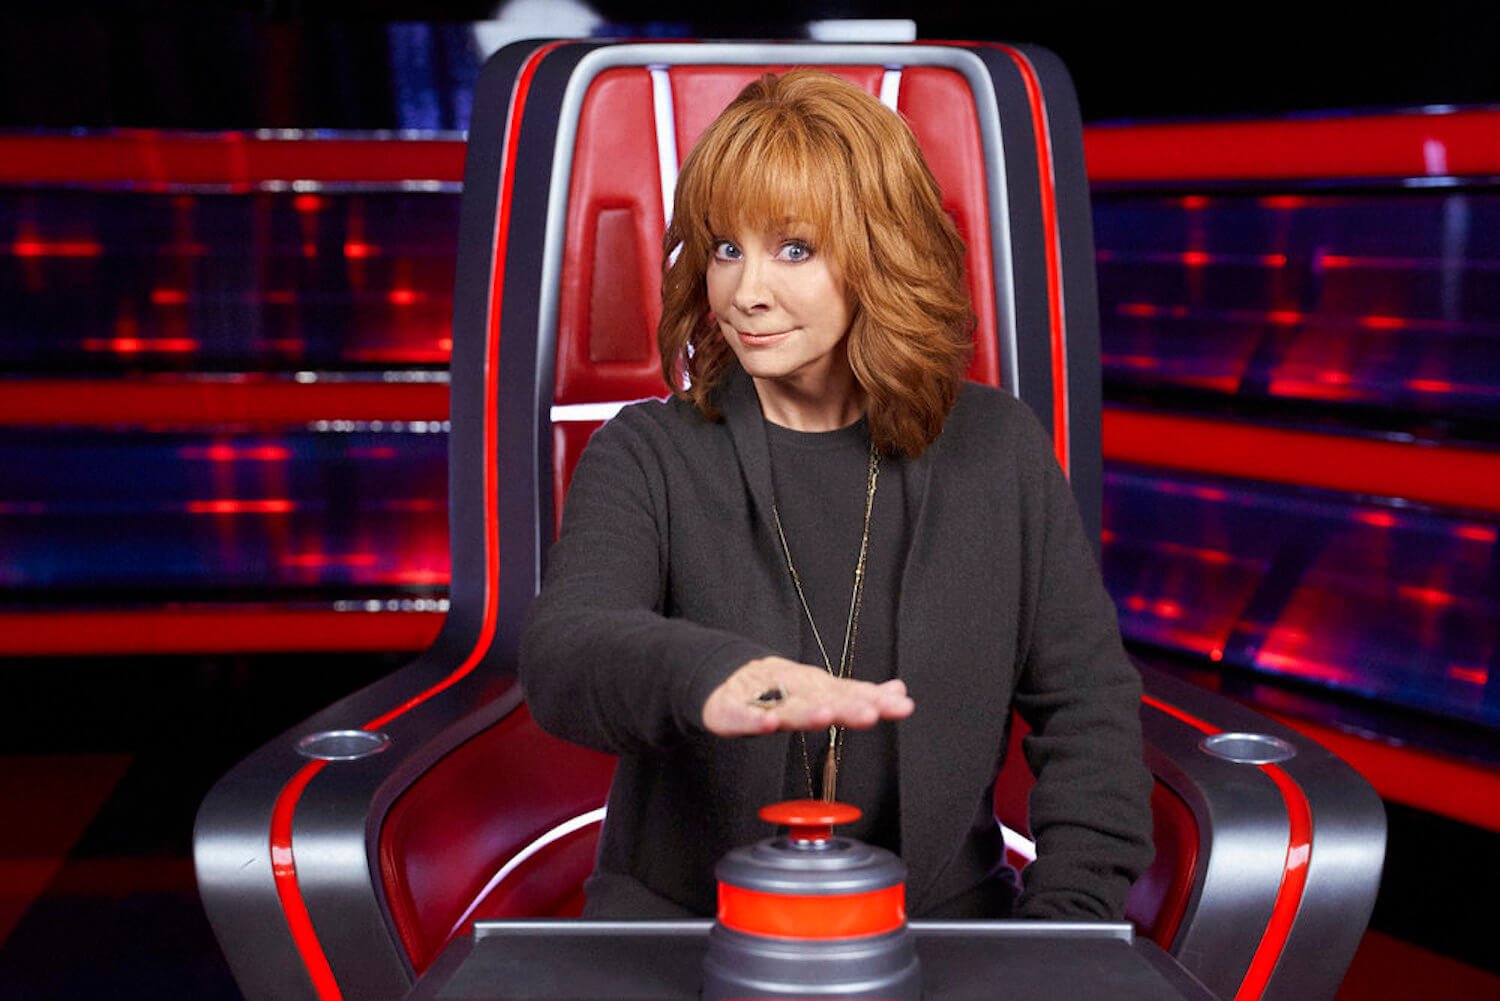 Reba McEntire with her hand over the red buzzer in 'The Voice' Season 23 during Knockout Rounds